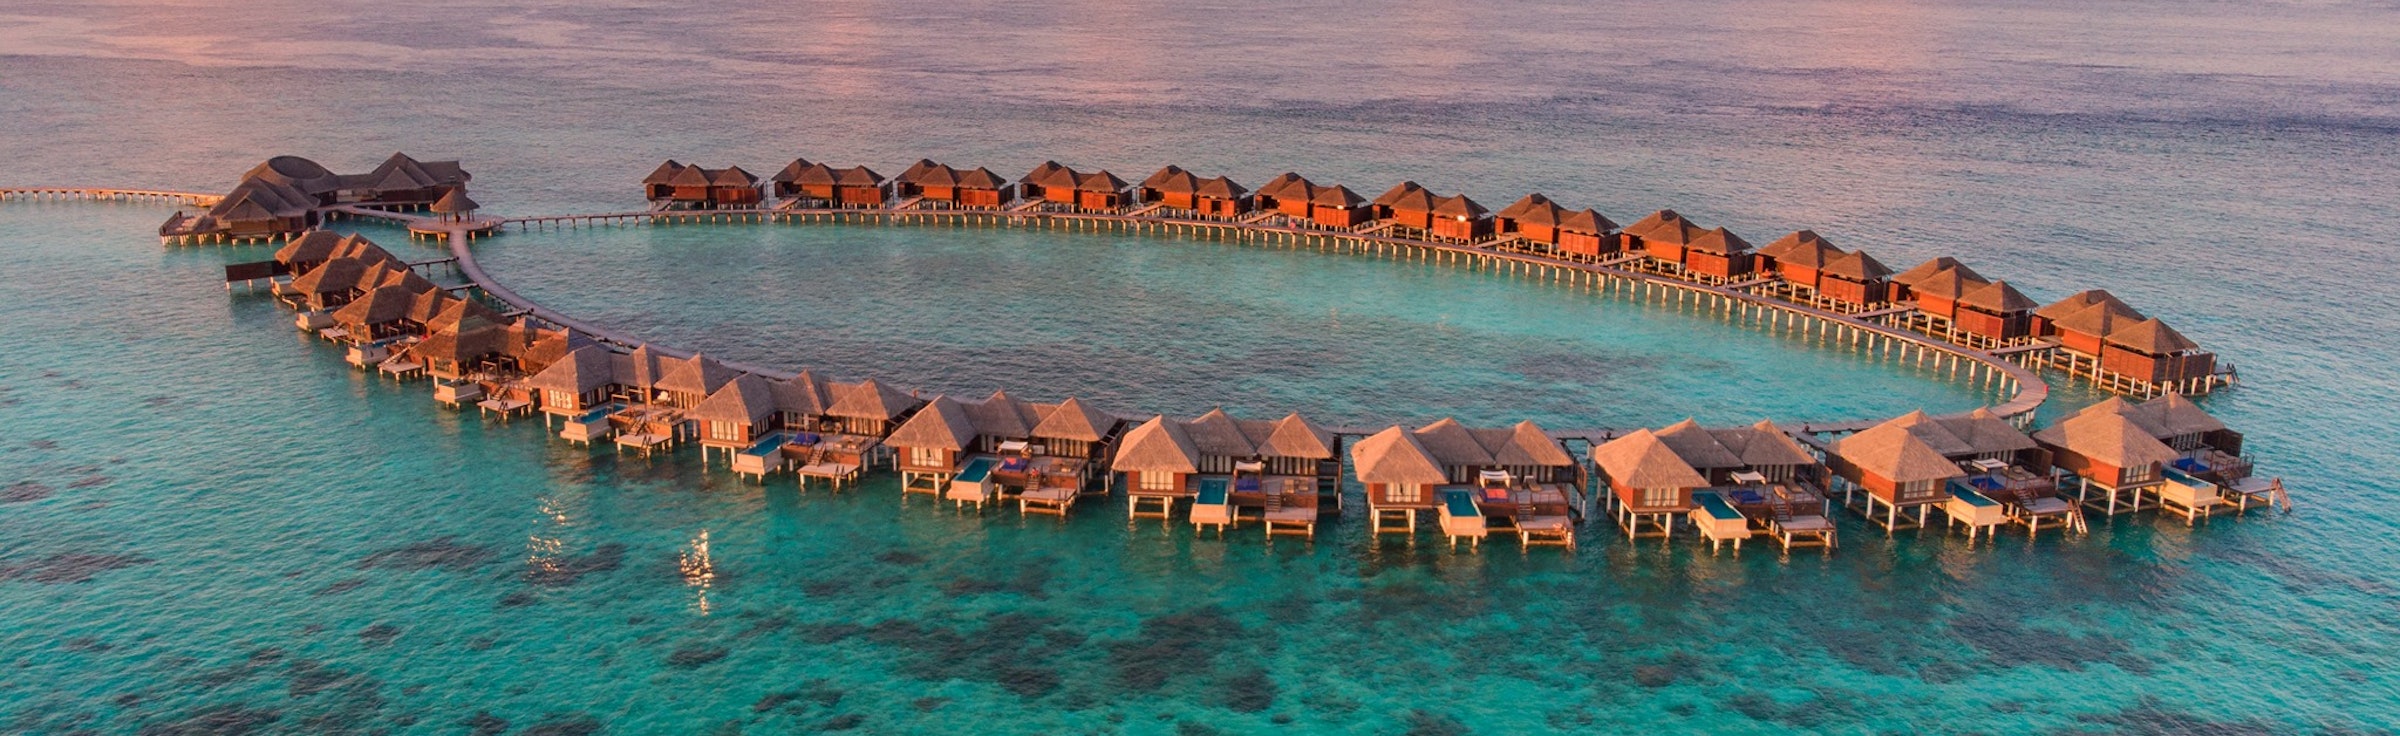 Maldives Tour Packages from Nagpur